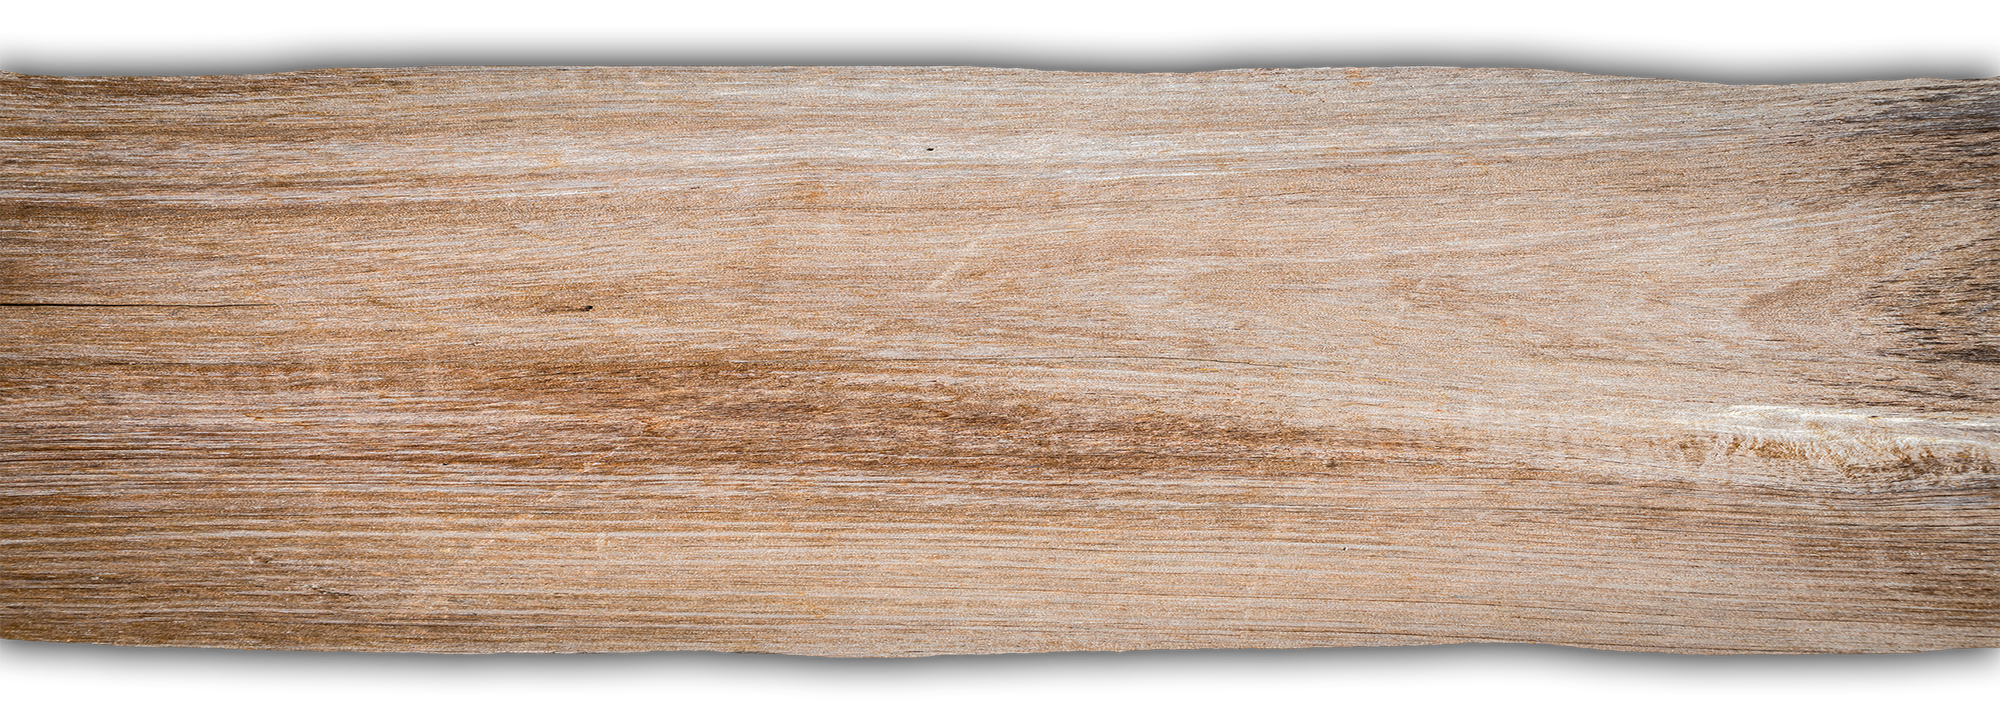 Plank Wood Plank Transparent Background Images For Graphic Design Or